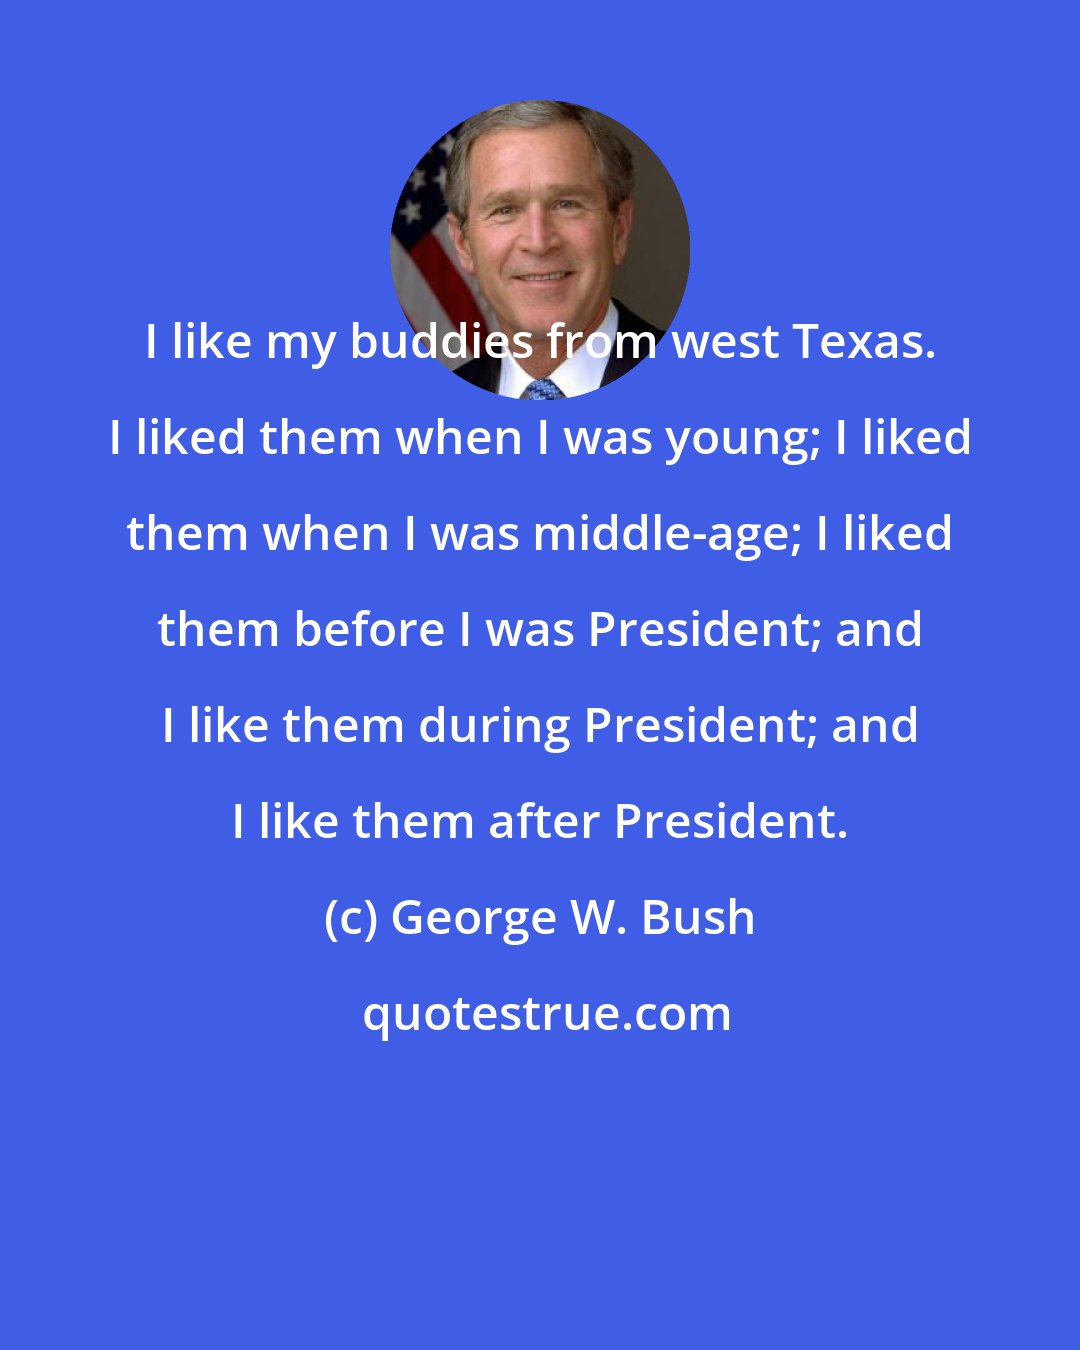 George W. Bush: I like my buddies from west Texas. I liked them when I was young; I liked them when I was middle-age; I liked them before I was President; and I like them during President; and I like them after President.